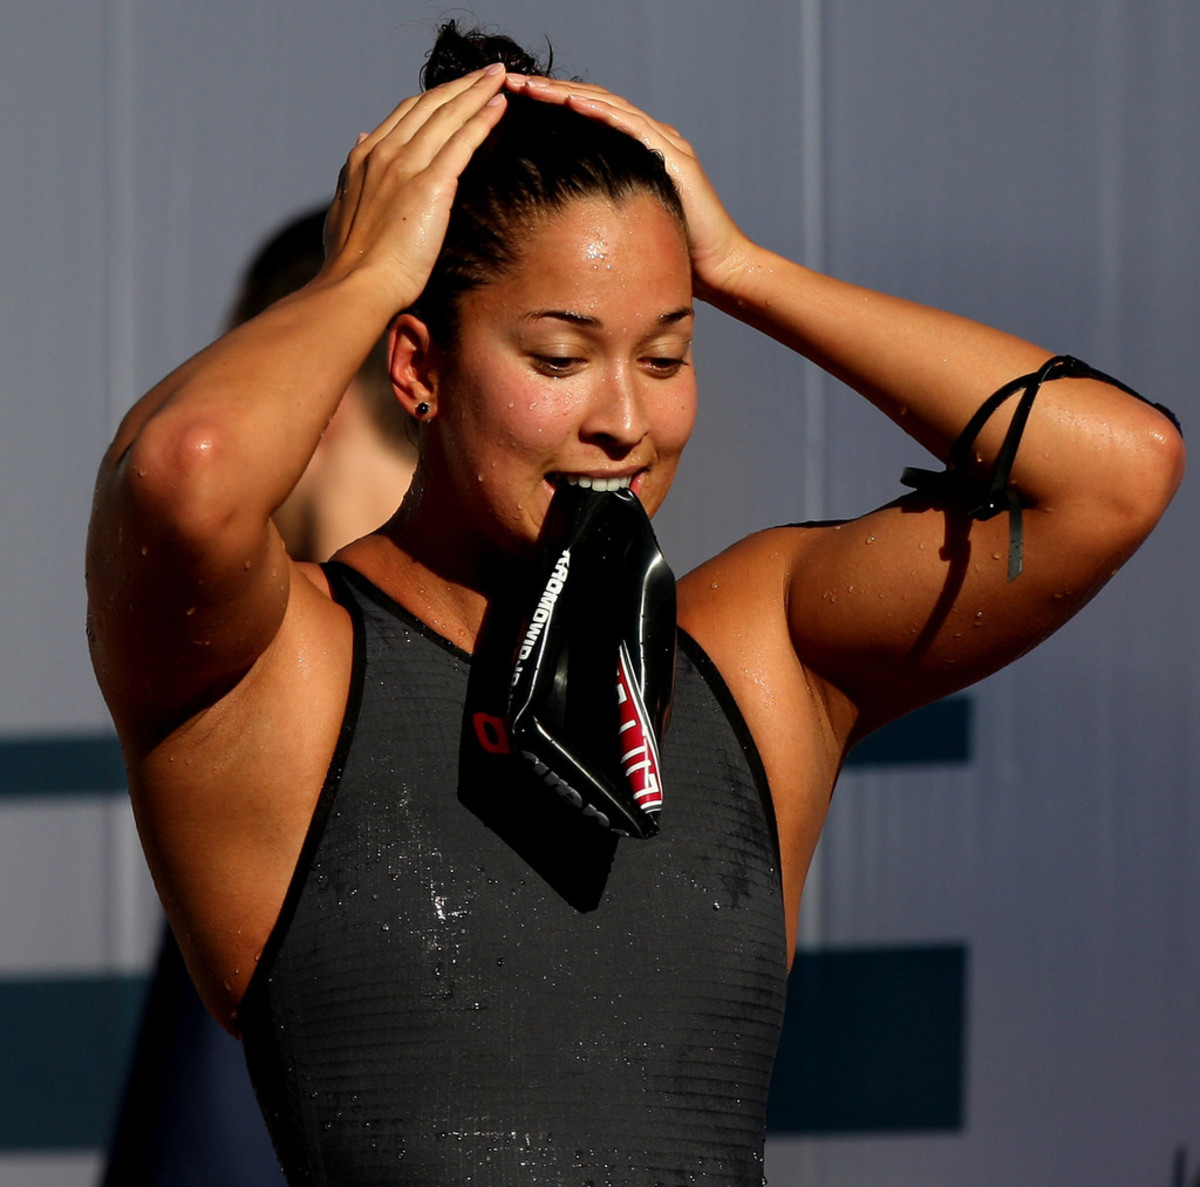 Ranomi Kromowidjojo reacts after the Women's 50 meter freestyle event in Rome.